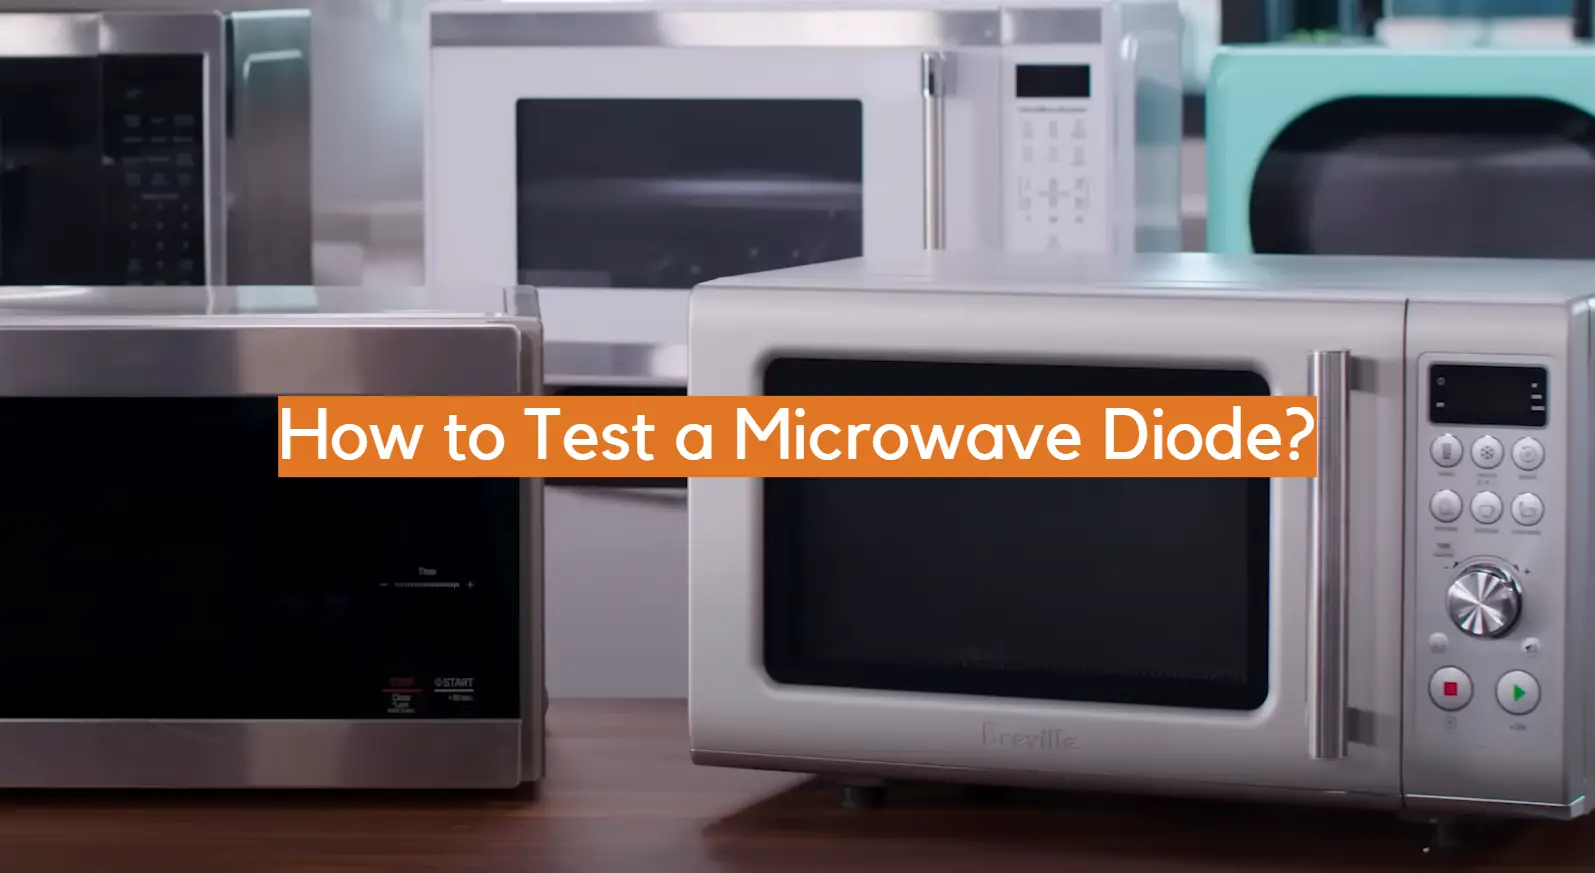 How to Test a Microwave Diode?